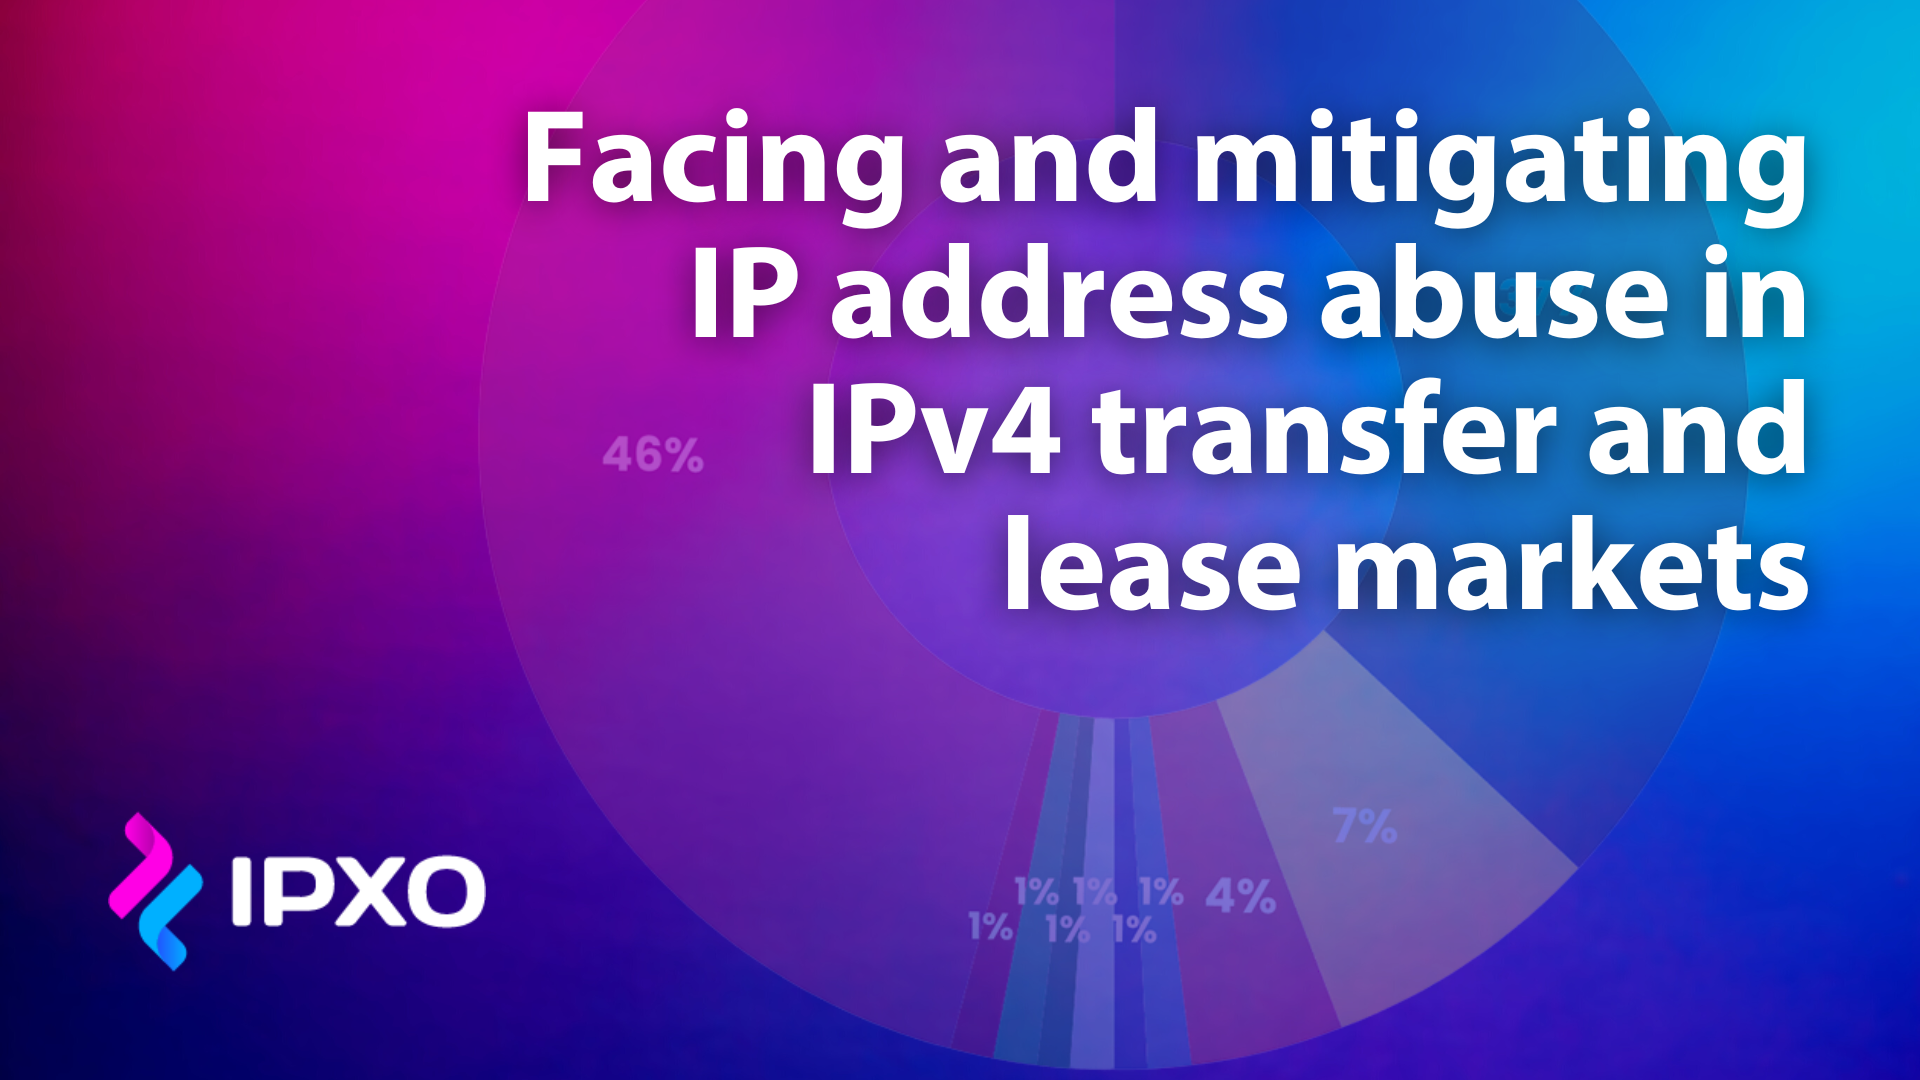 Facing and mitigating IP address abuse in IPv4 transfer and lease markets